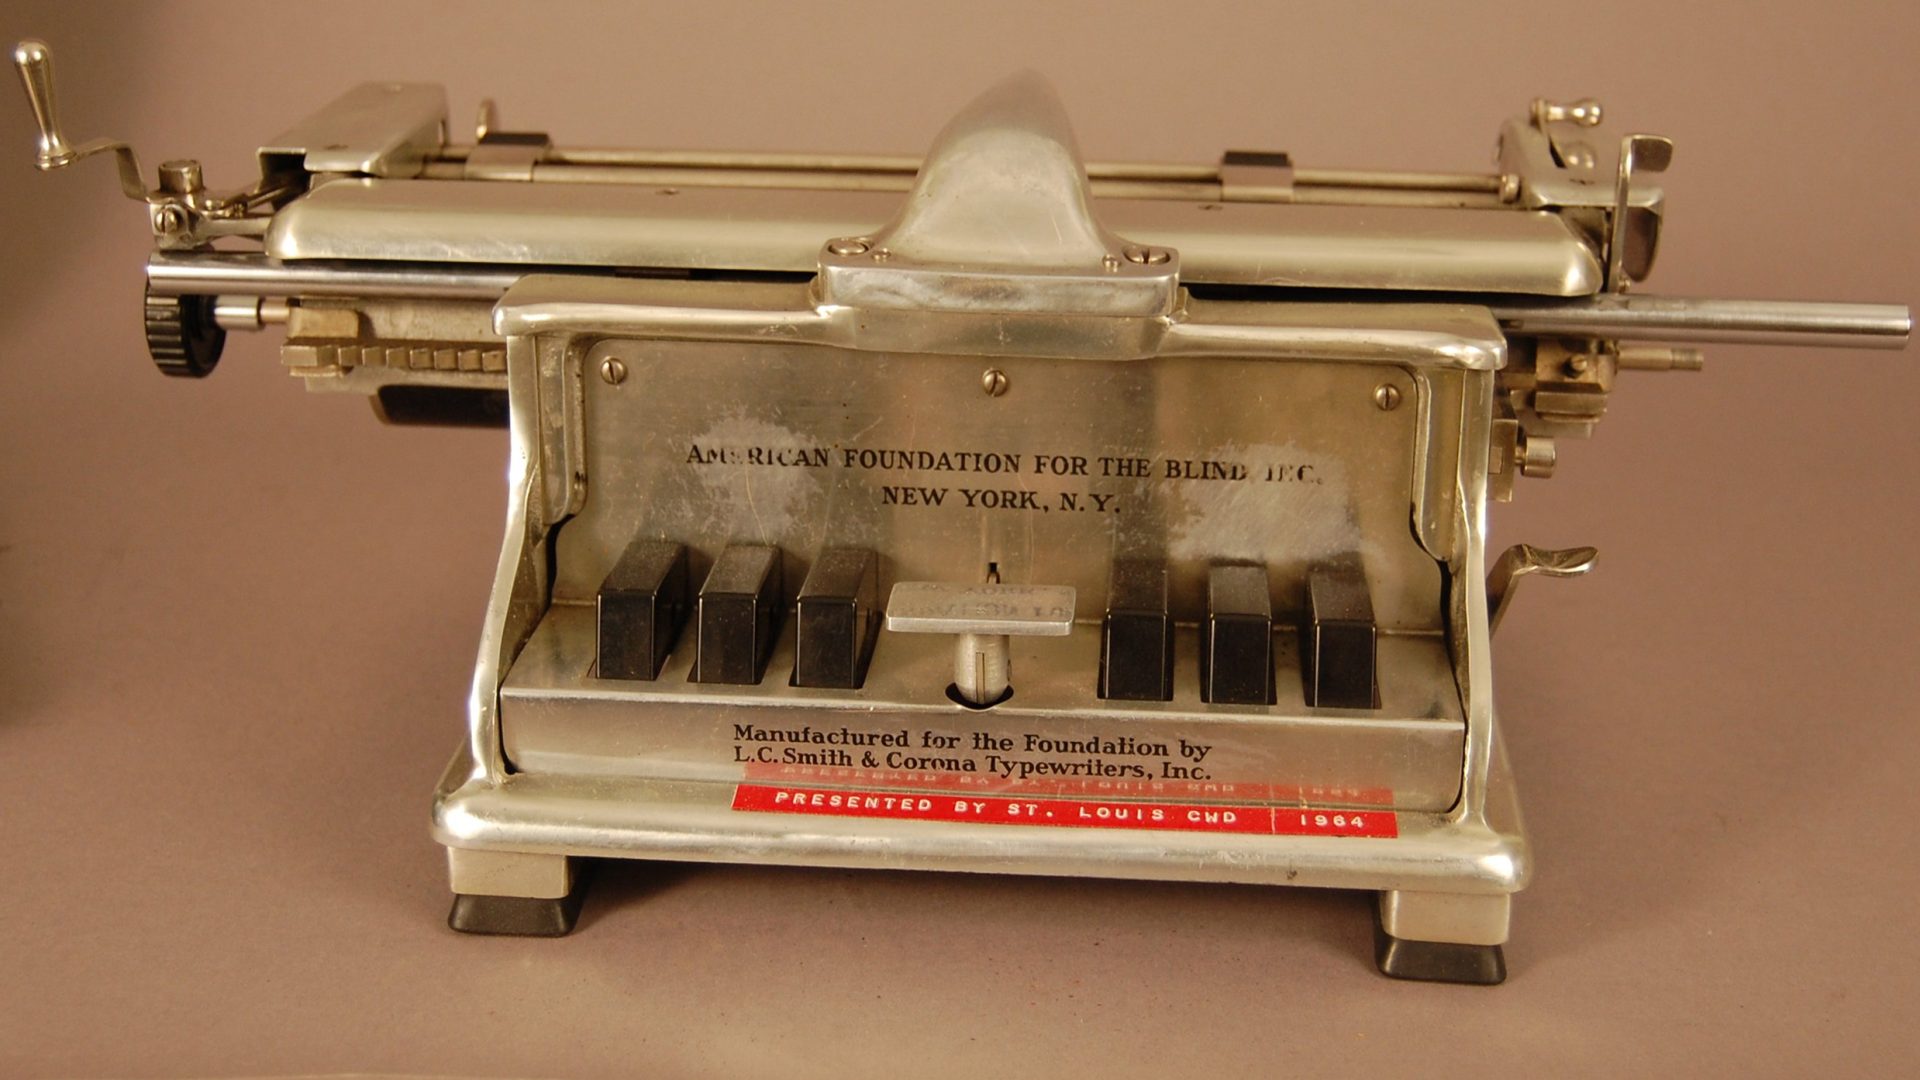 Braillewriter made of cast aluminum alloy, highly polished on the outside. It has piano-like keys in the front, separated by a stainless-steel space bar. Two folding arms extend from the back to hold the paper.